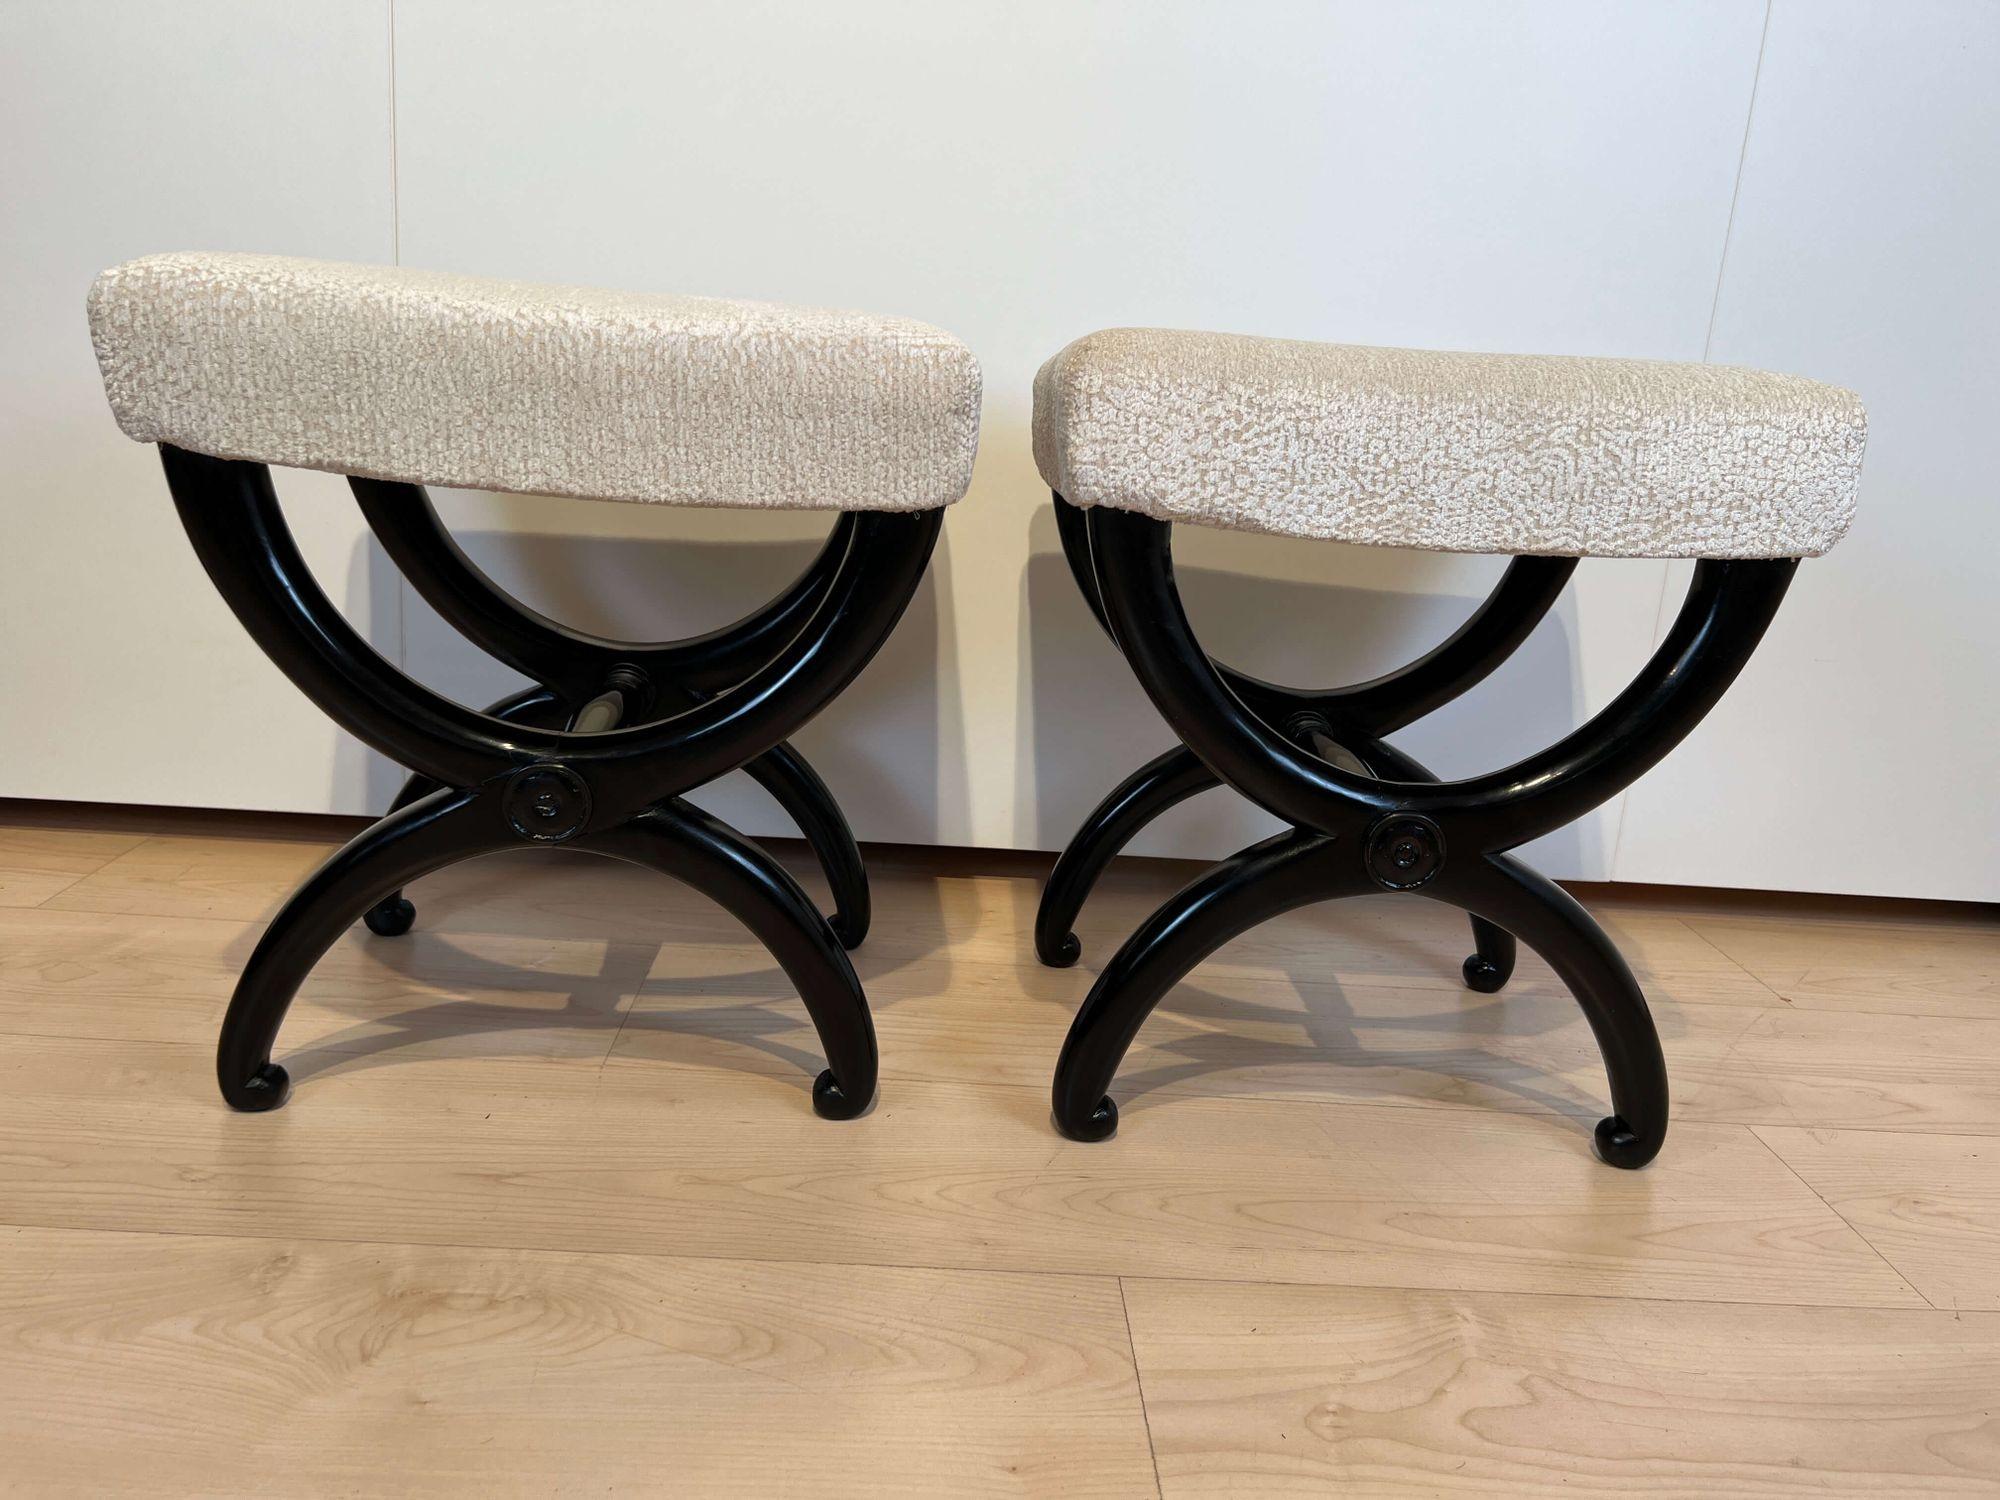 Pair of Antique Stools, Ebonized Beech Wood, Creme Fabric, France circa 1820 For Sale 1